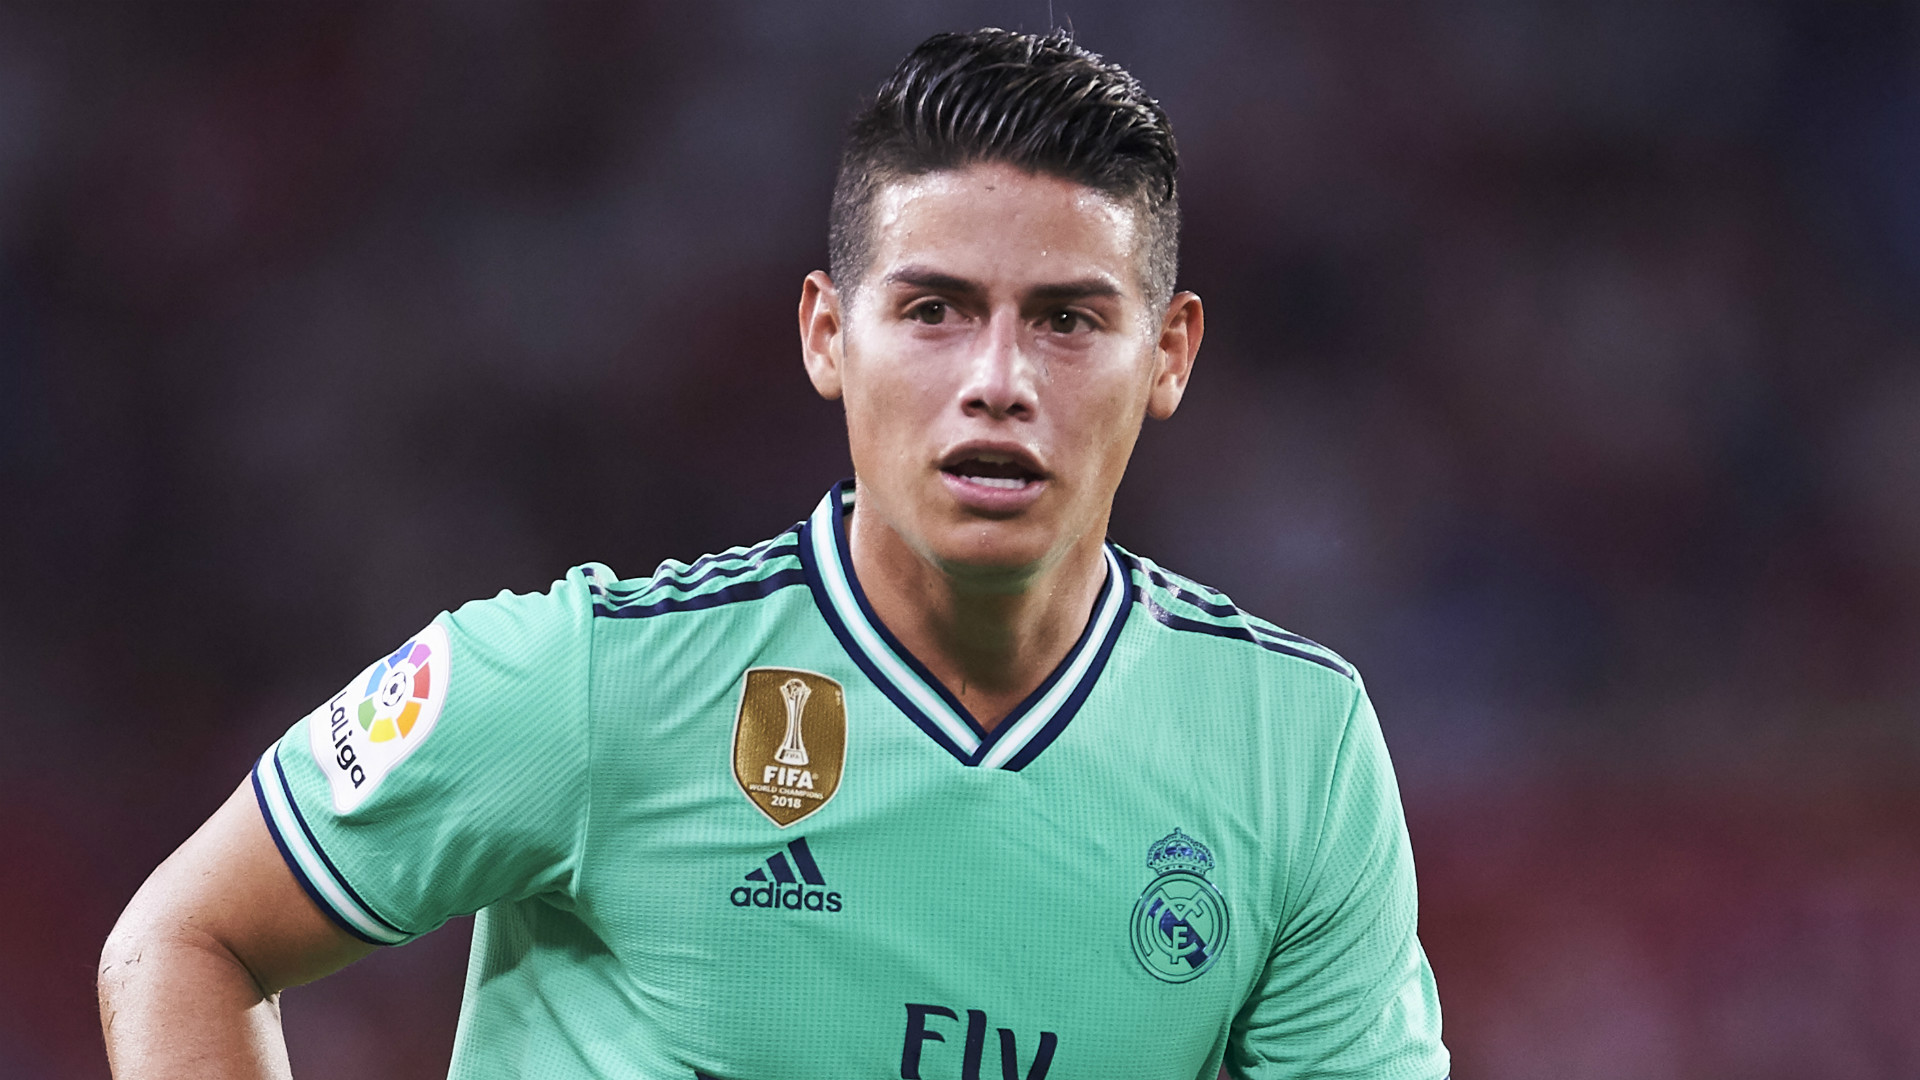 james rodriguez real madrid jersey number